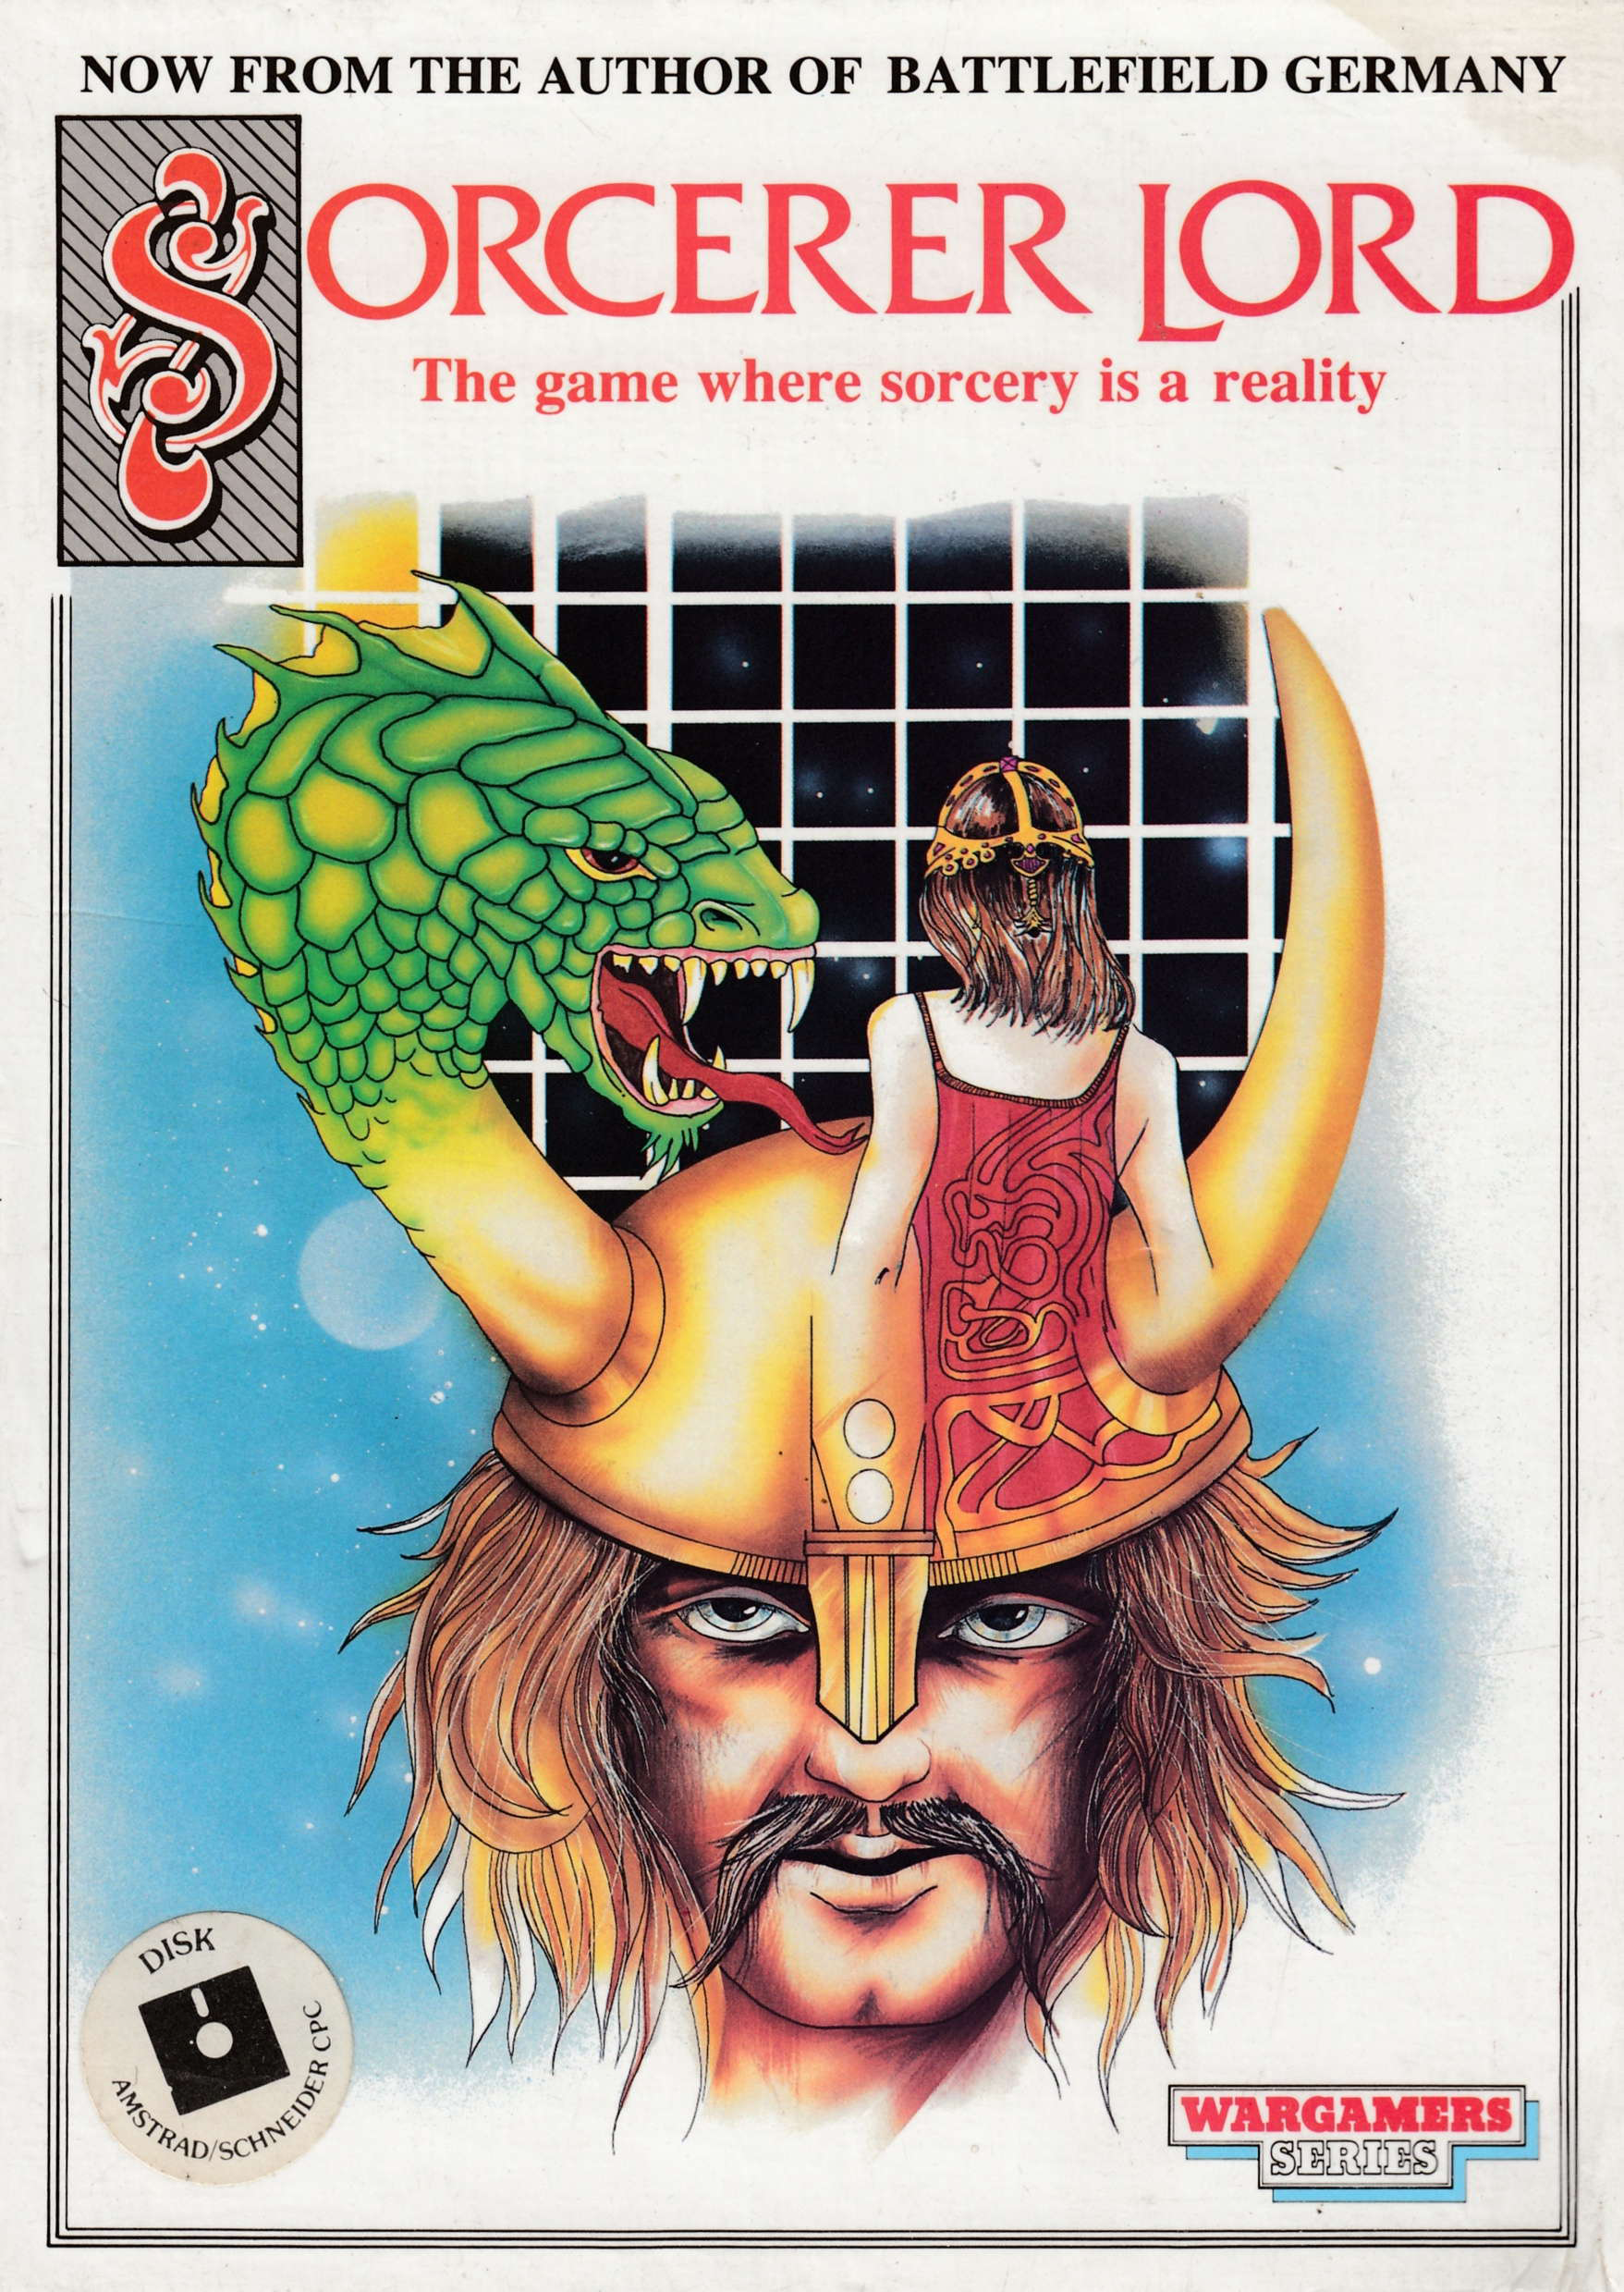 cover of the Amstrad CPC game Sorcerer Lord  by GameBase CPC